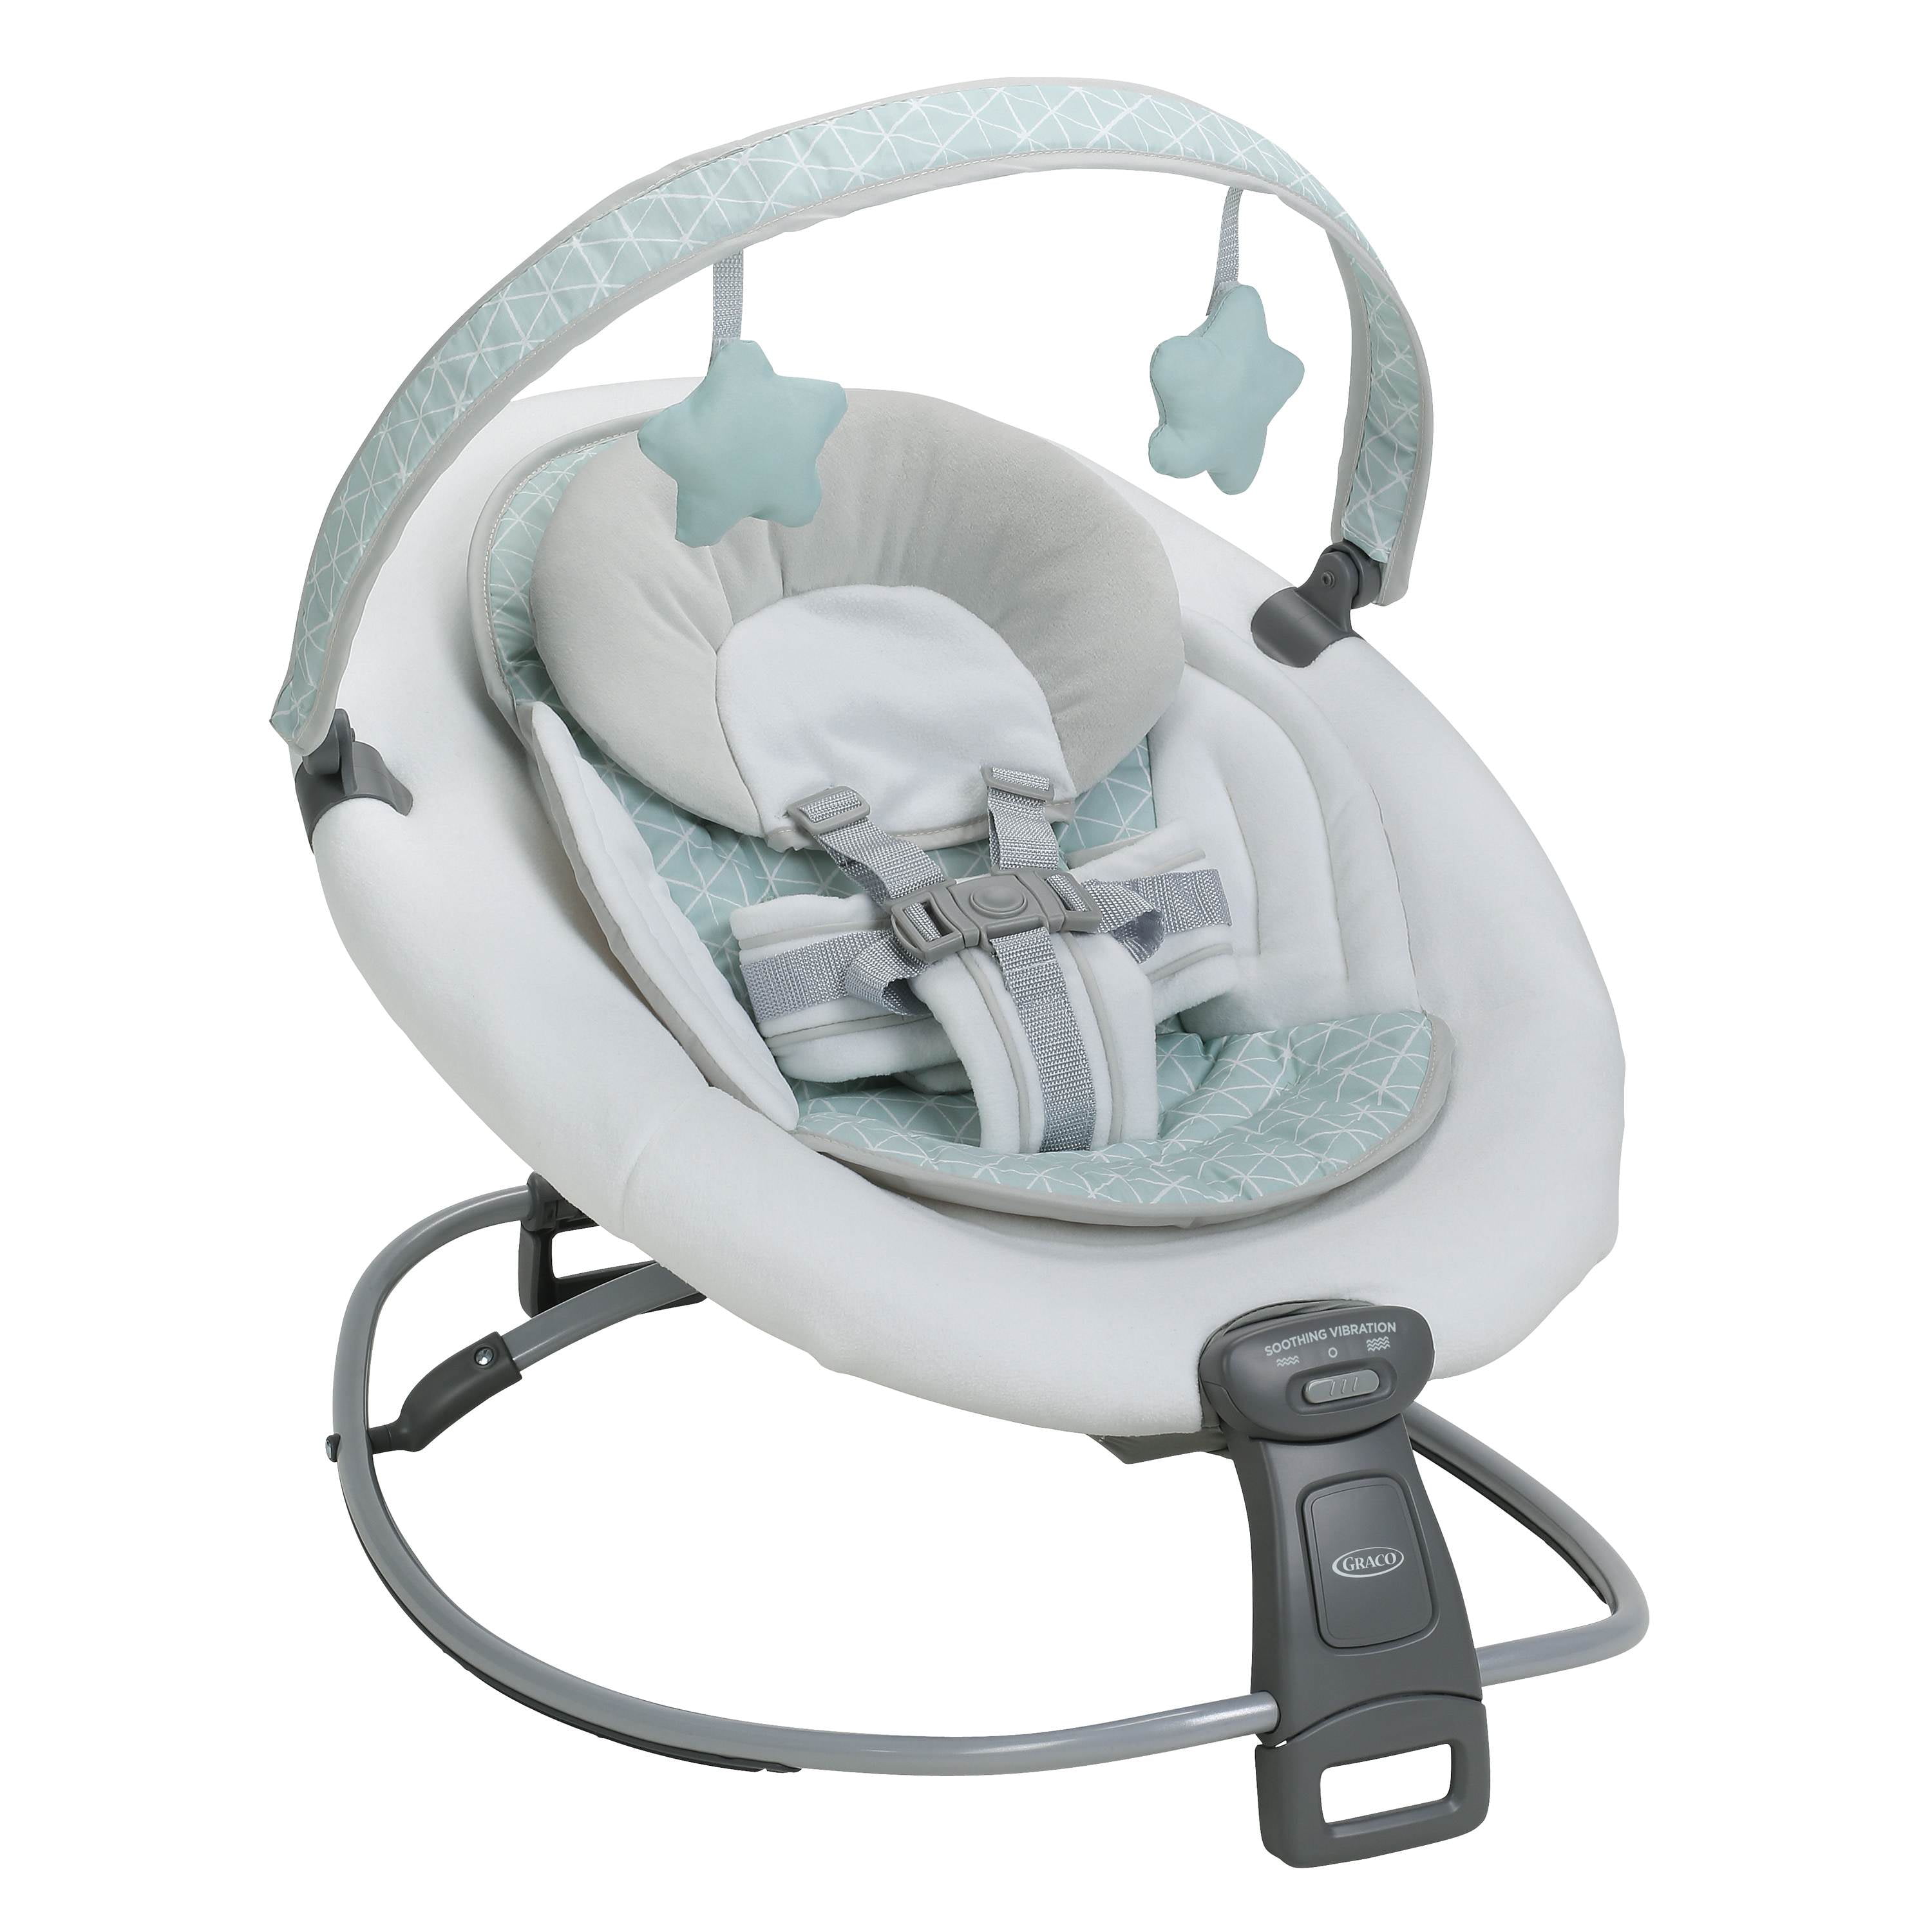 graco duet rocker and baby seat